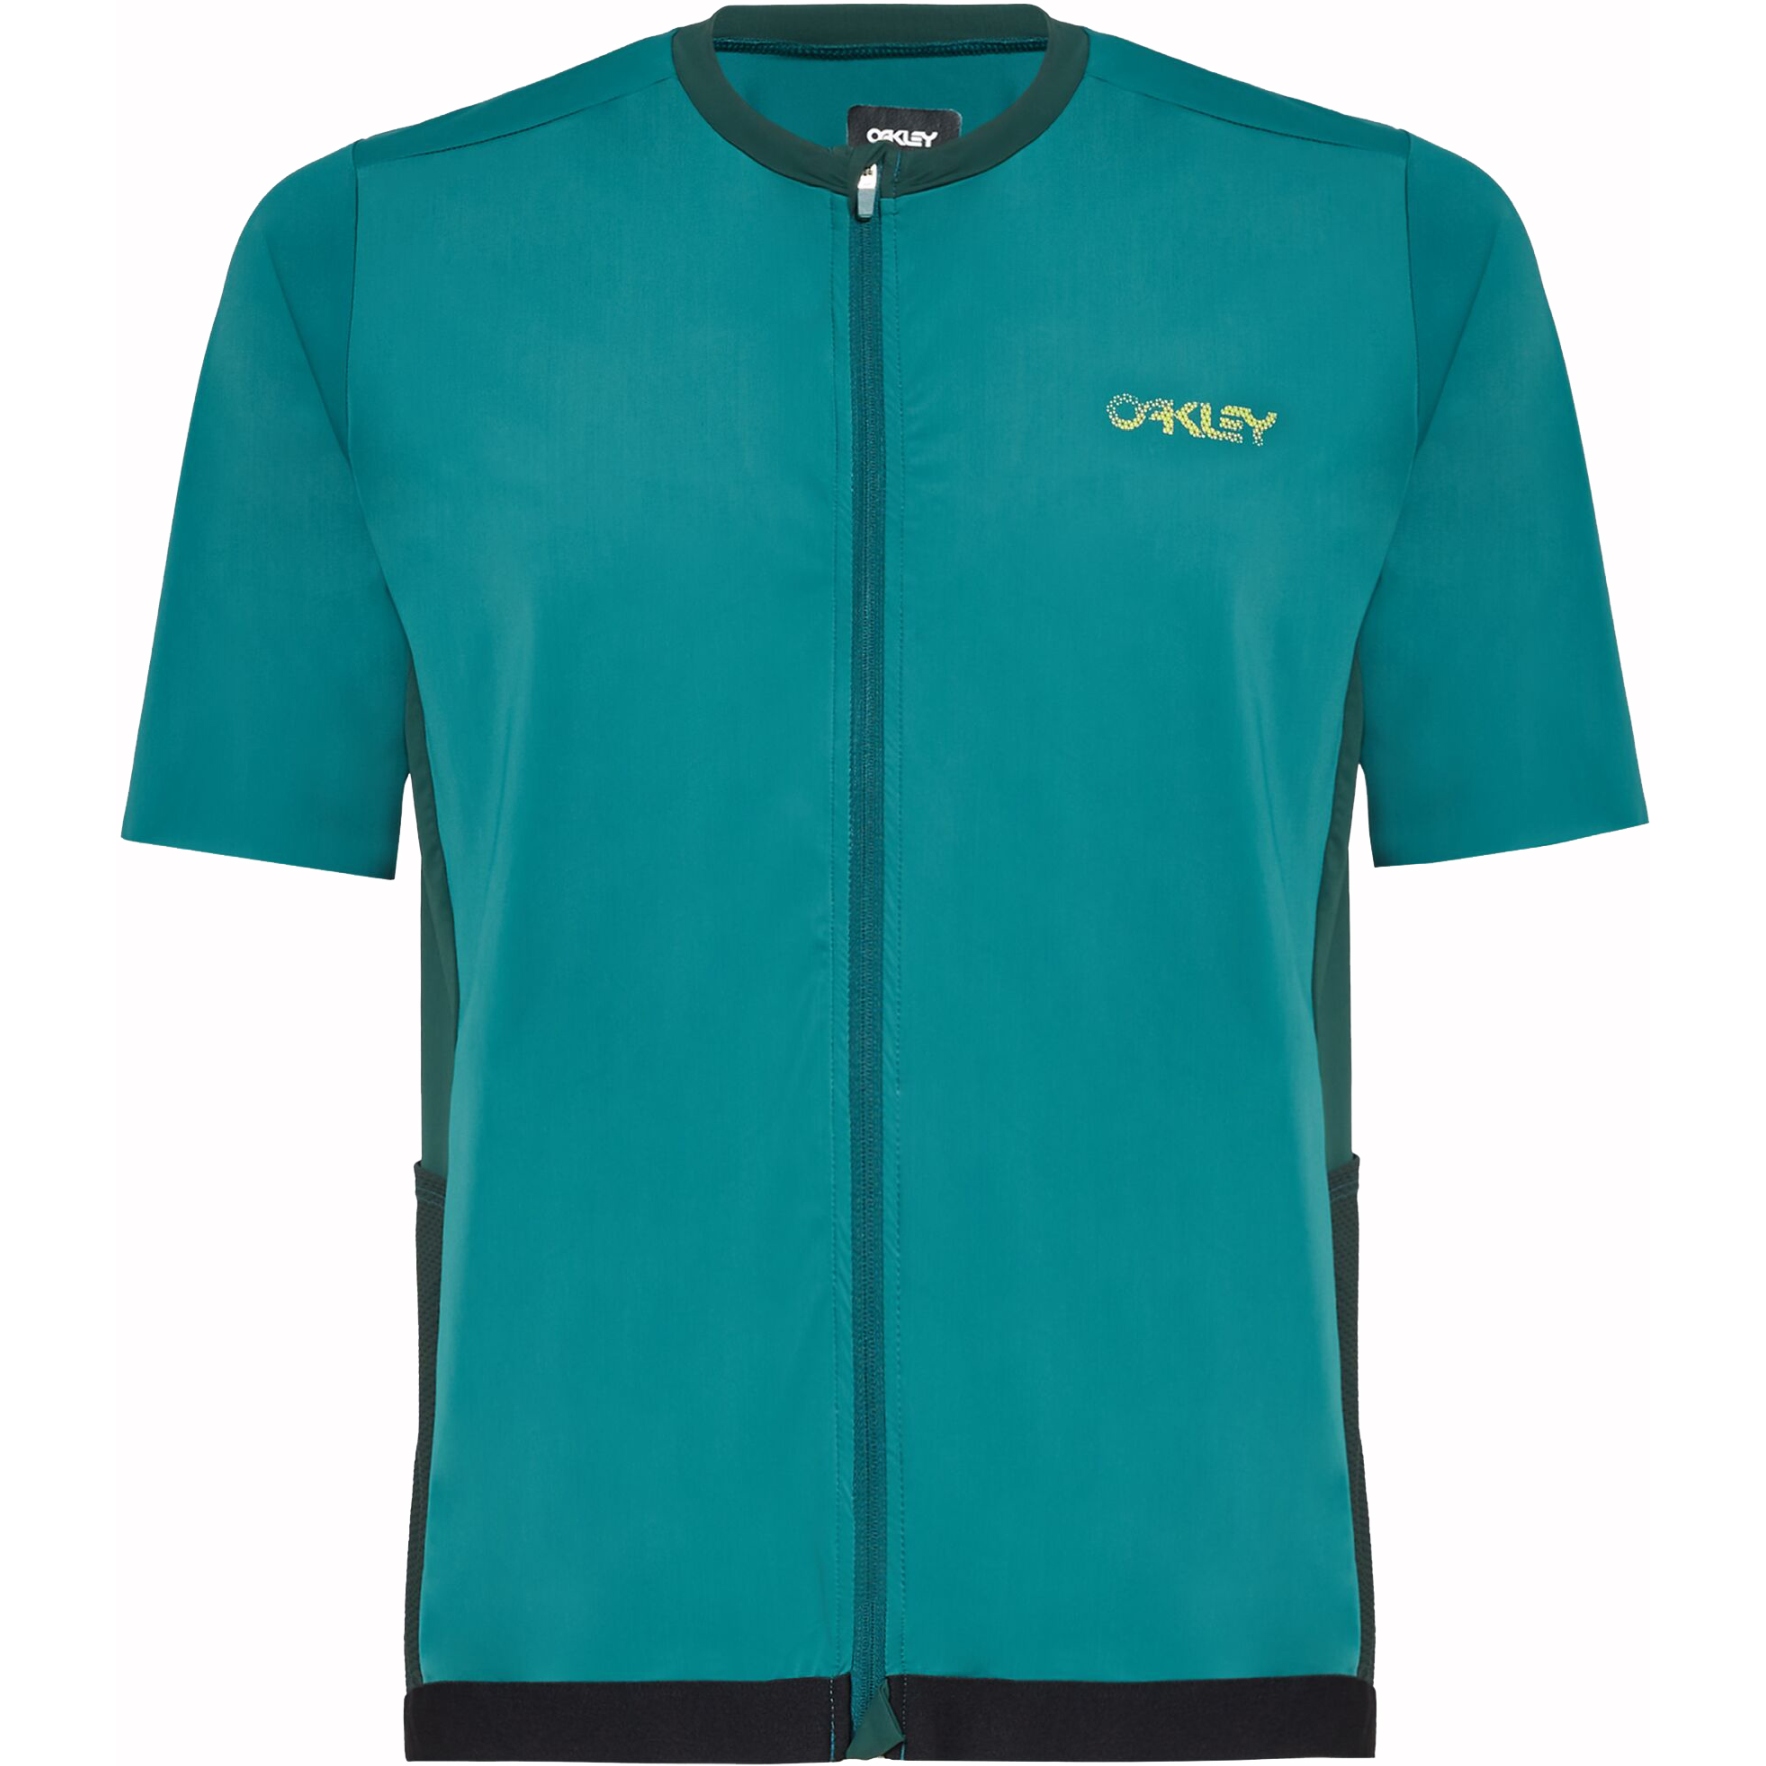 Productfoto van Oakley Point To Point Shirt Heren - Bayberry